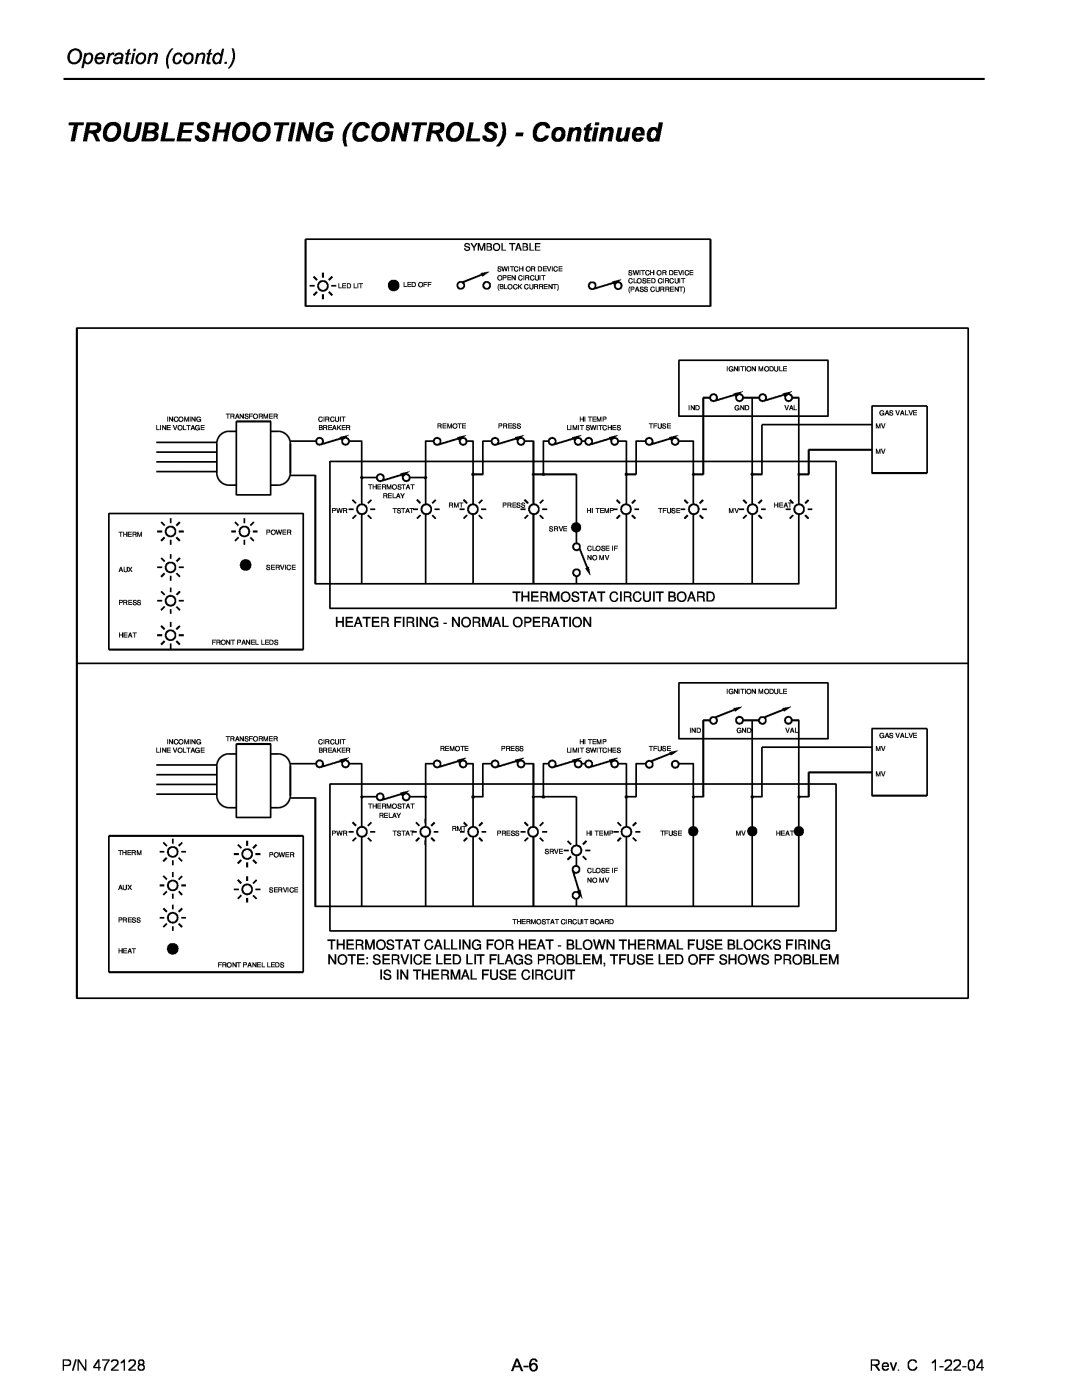 Pentair CH installation manual TROUBLESHOOTING CONTROLS - Continued, Operation contd, Rev. C, Thermostat Circuit Board 